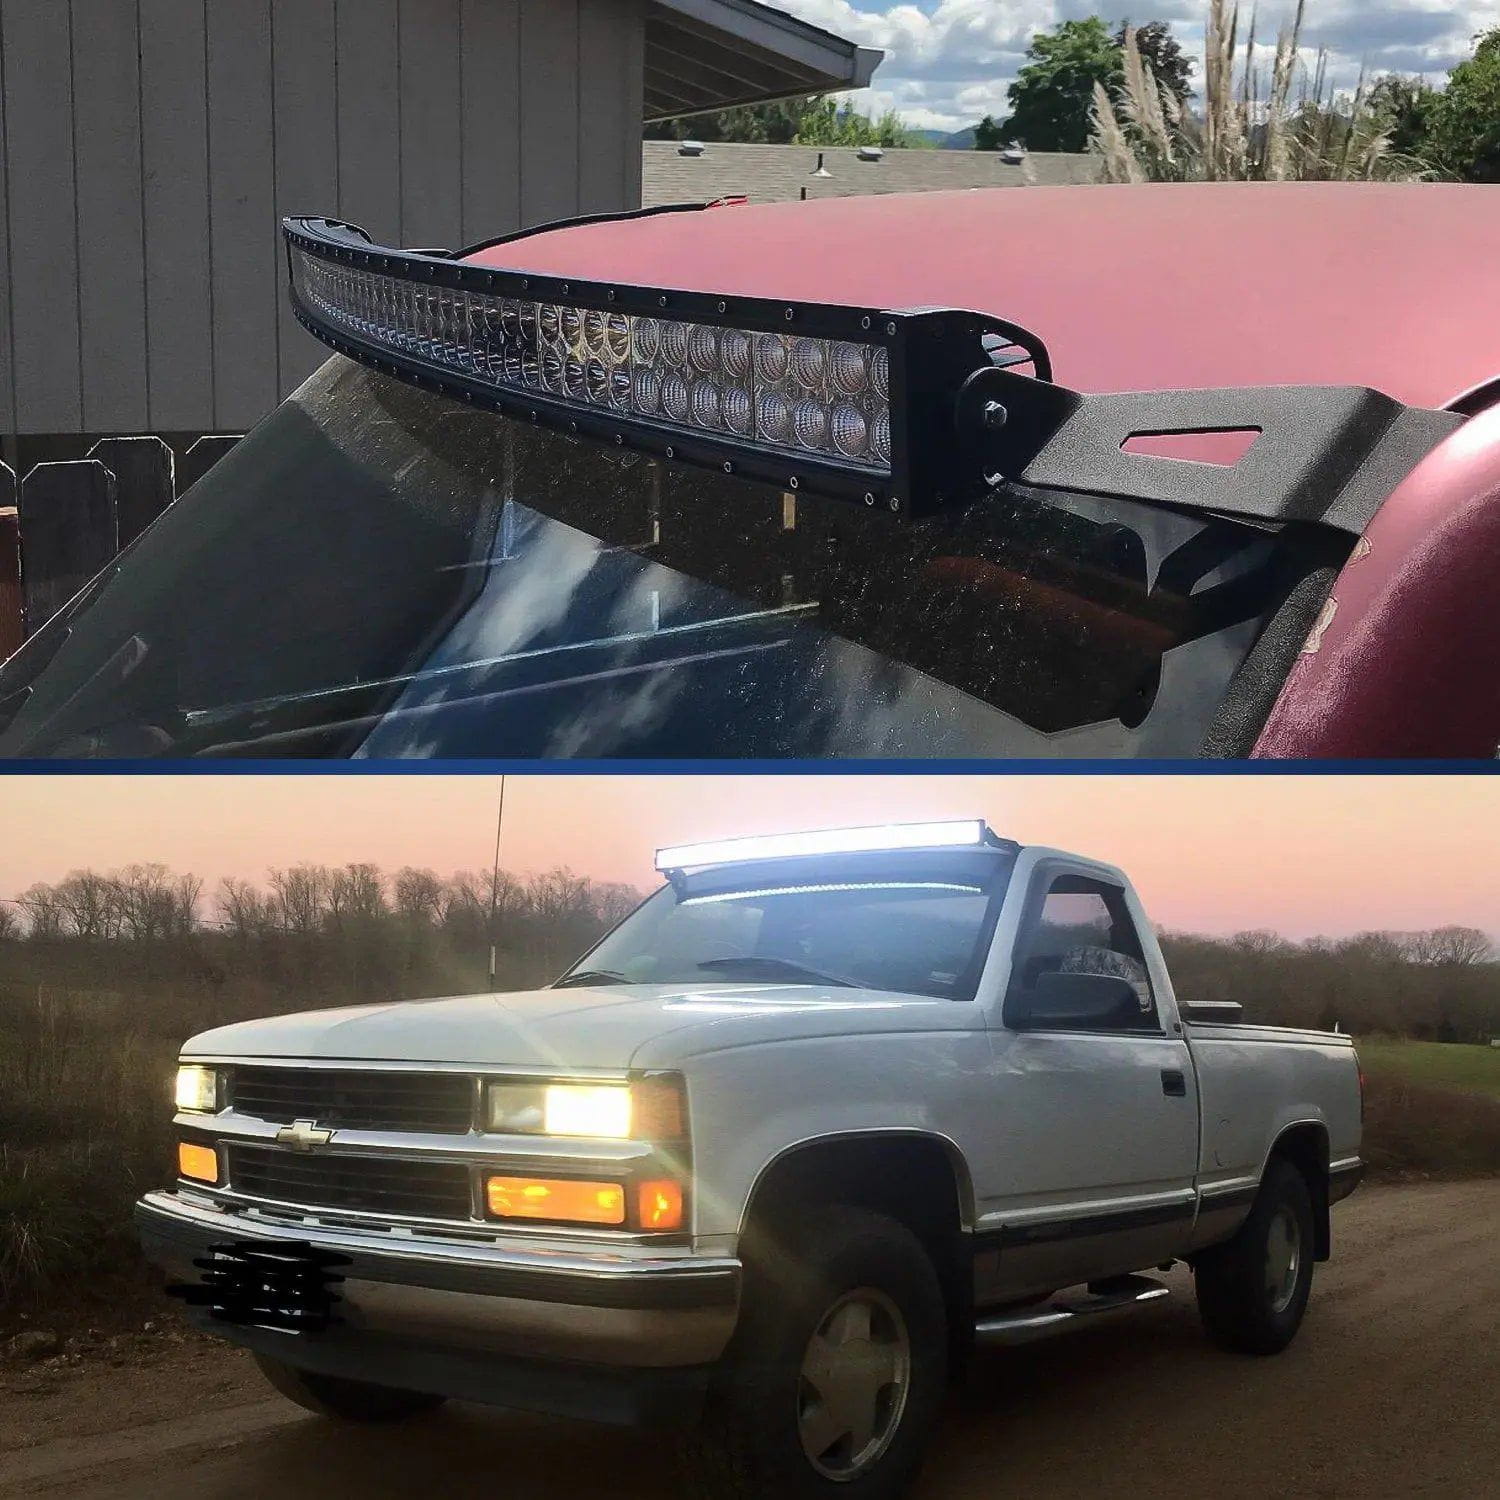 Mounting Accessory 50” Curved Light Bar Bracket at Upper Windshield Roof Cab for 1999-2006 Chevy Silverado Suburban Avalanche Tahoe & GMC Yukon Sierra (Pair)